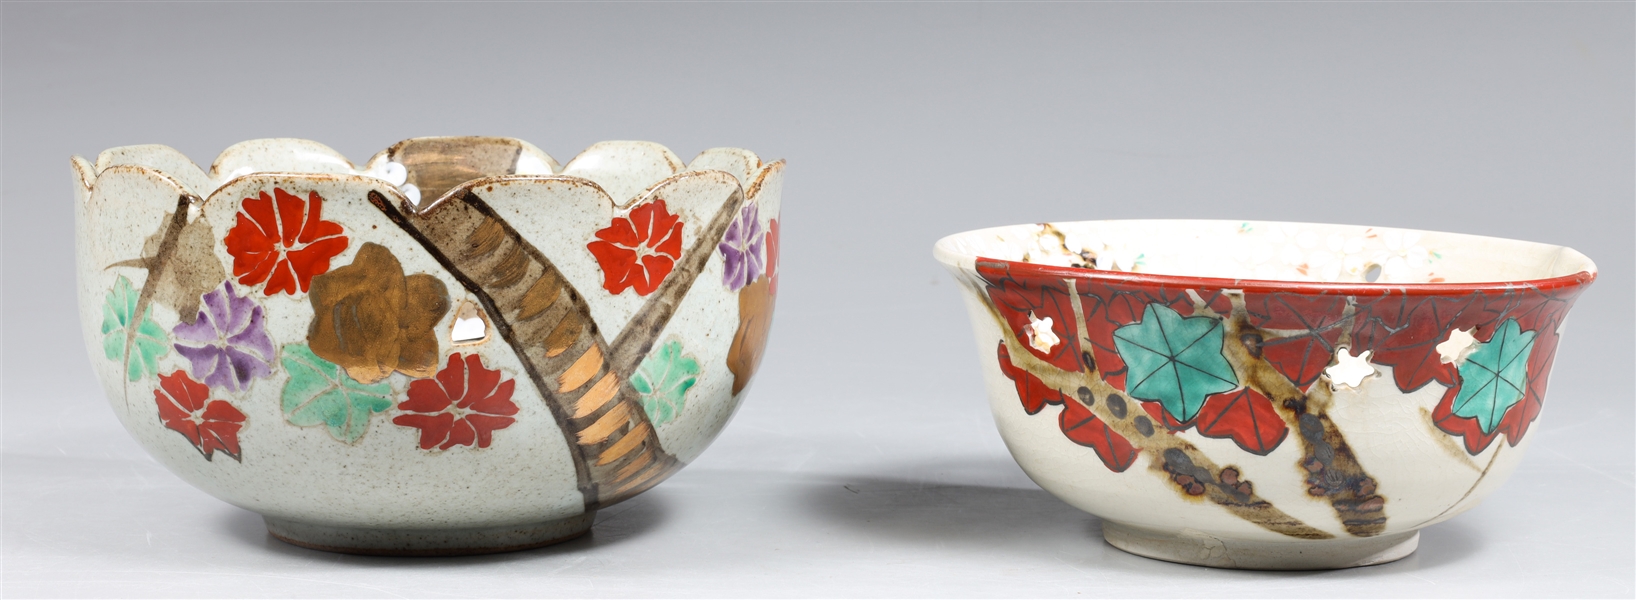 Group of Two Japanese Ceramic Bowls